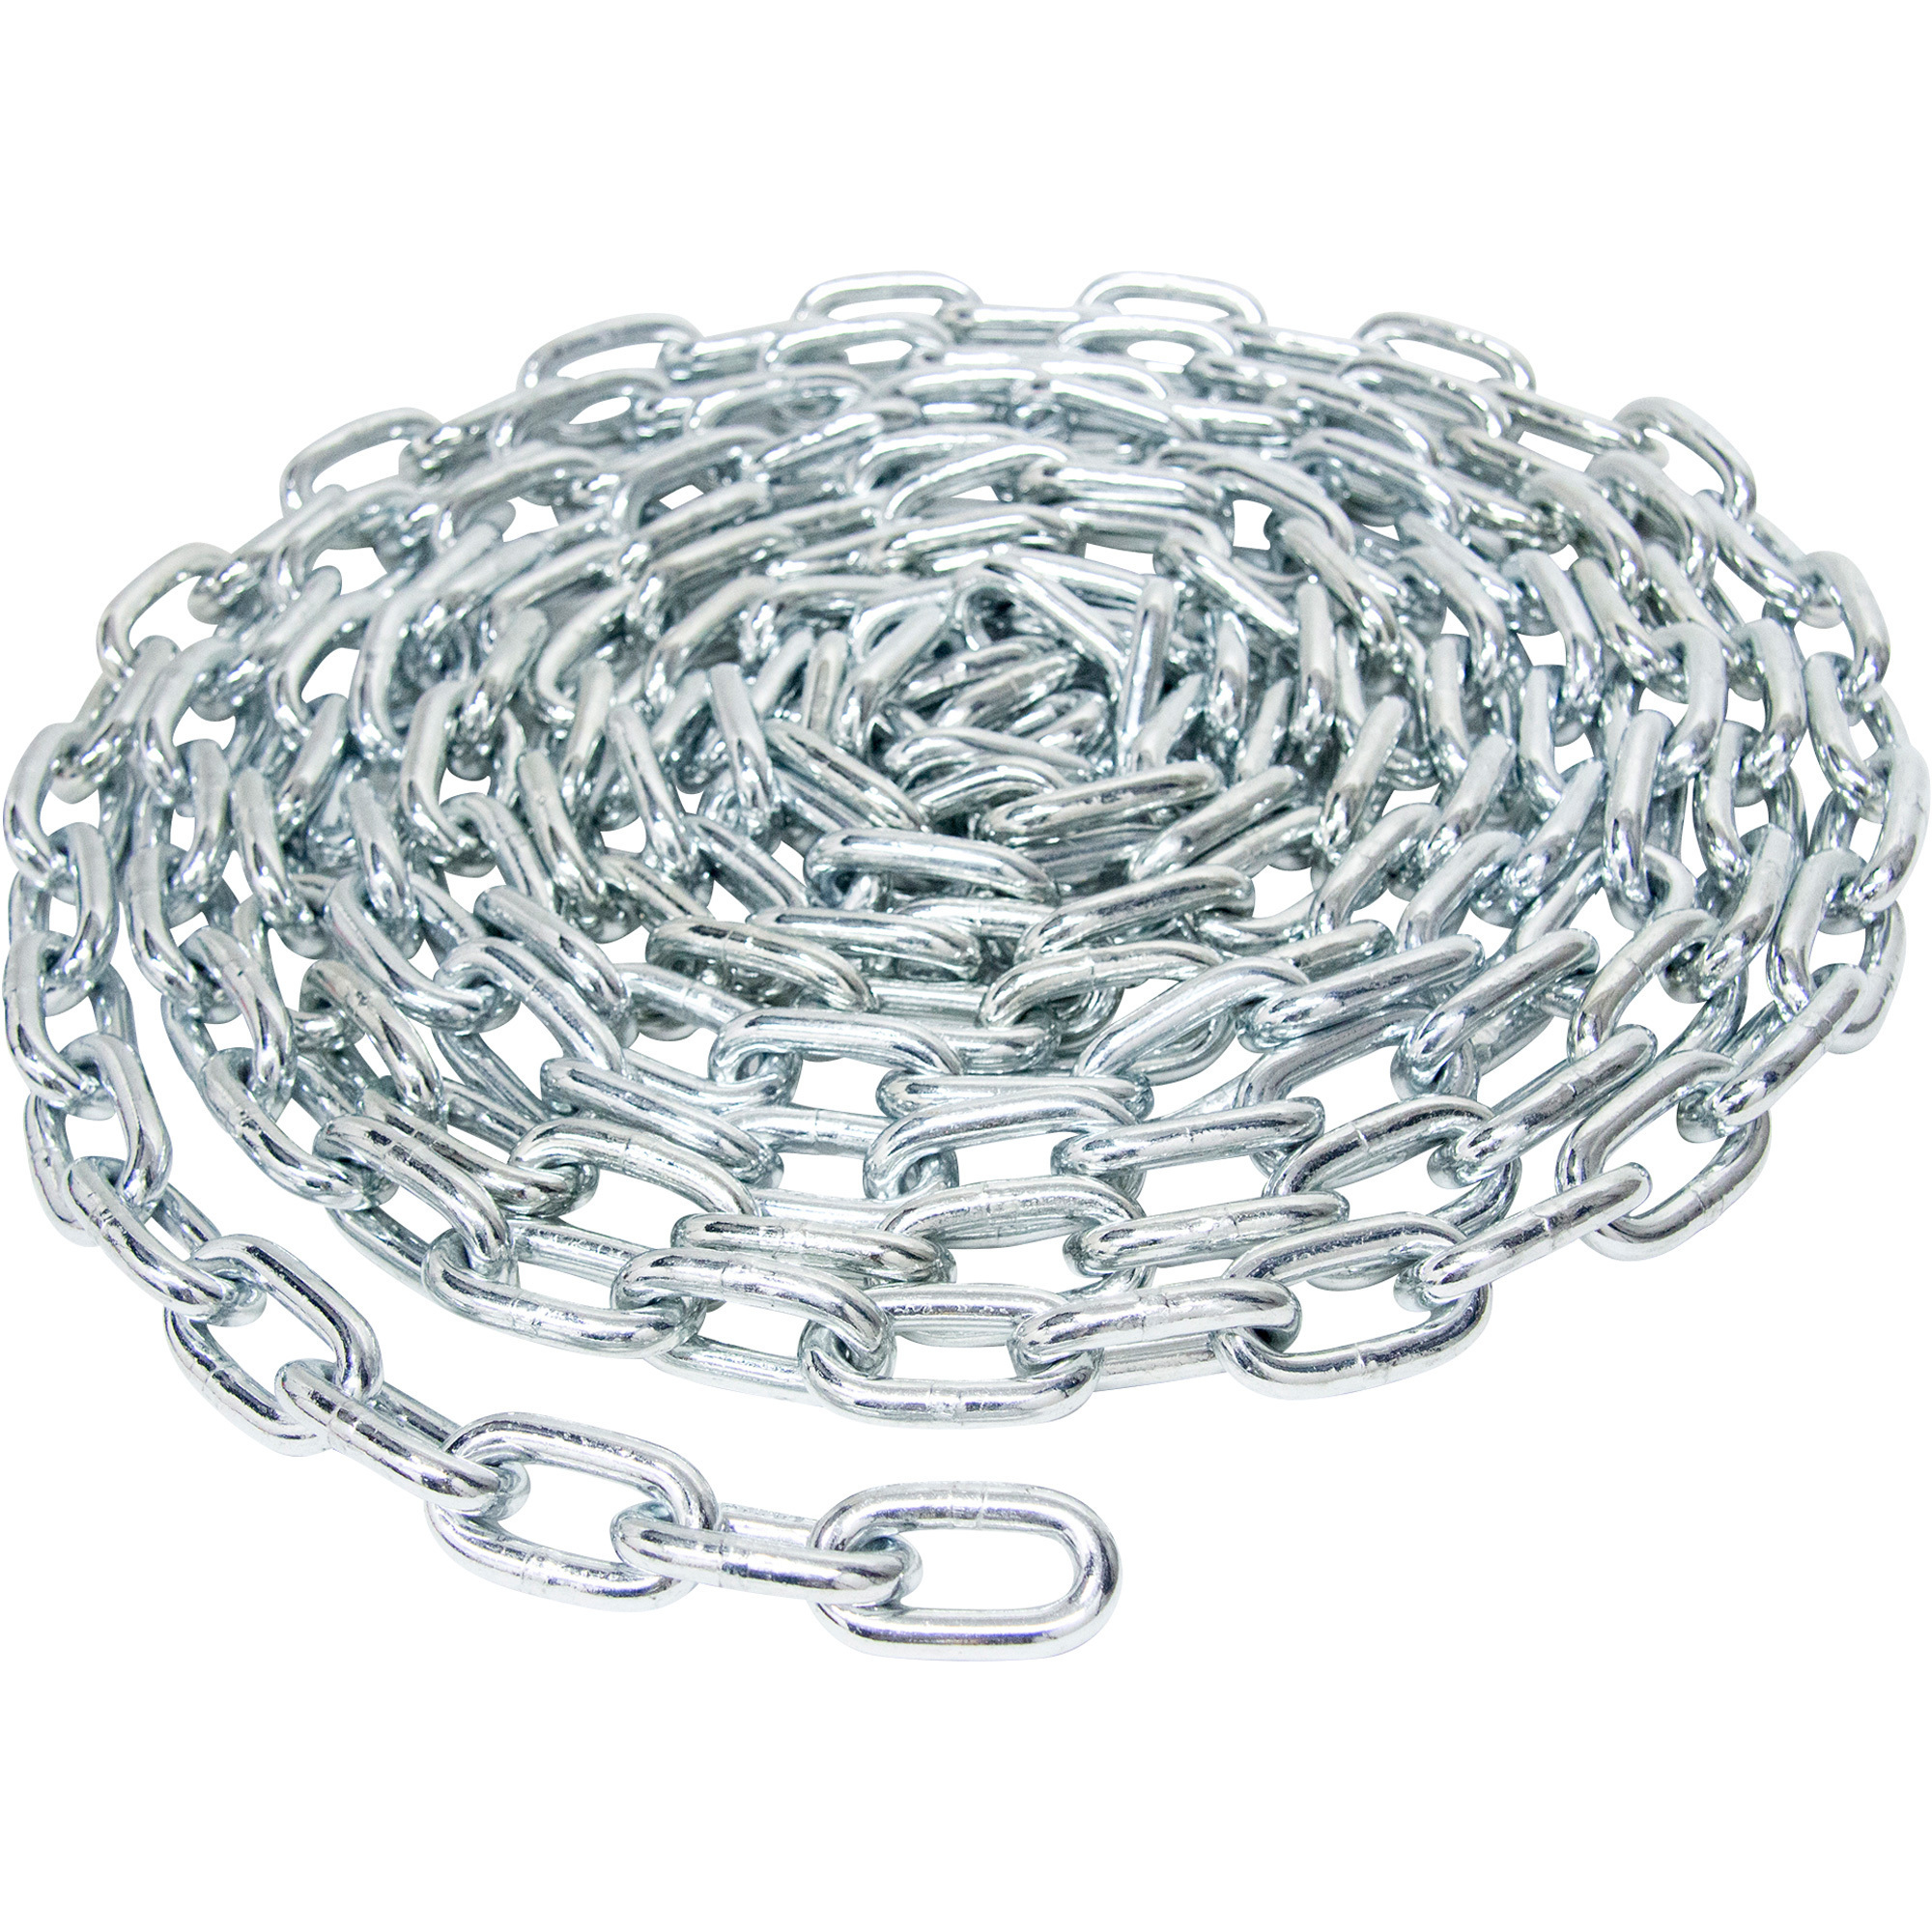 Mibro Grade 30 Proof Coil Zinc-Plated Chain, 5/16Inch x 20ft., Model 525221